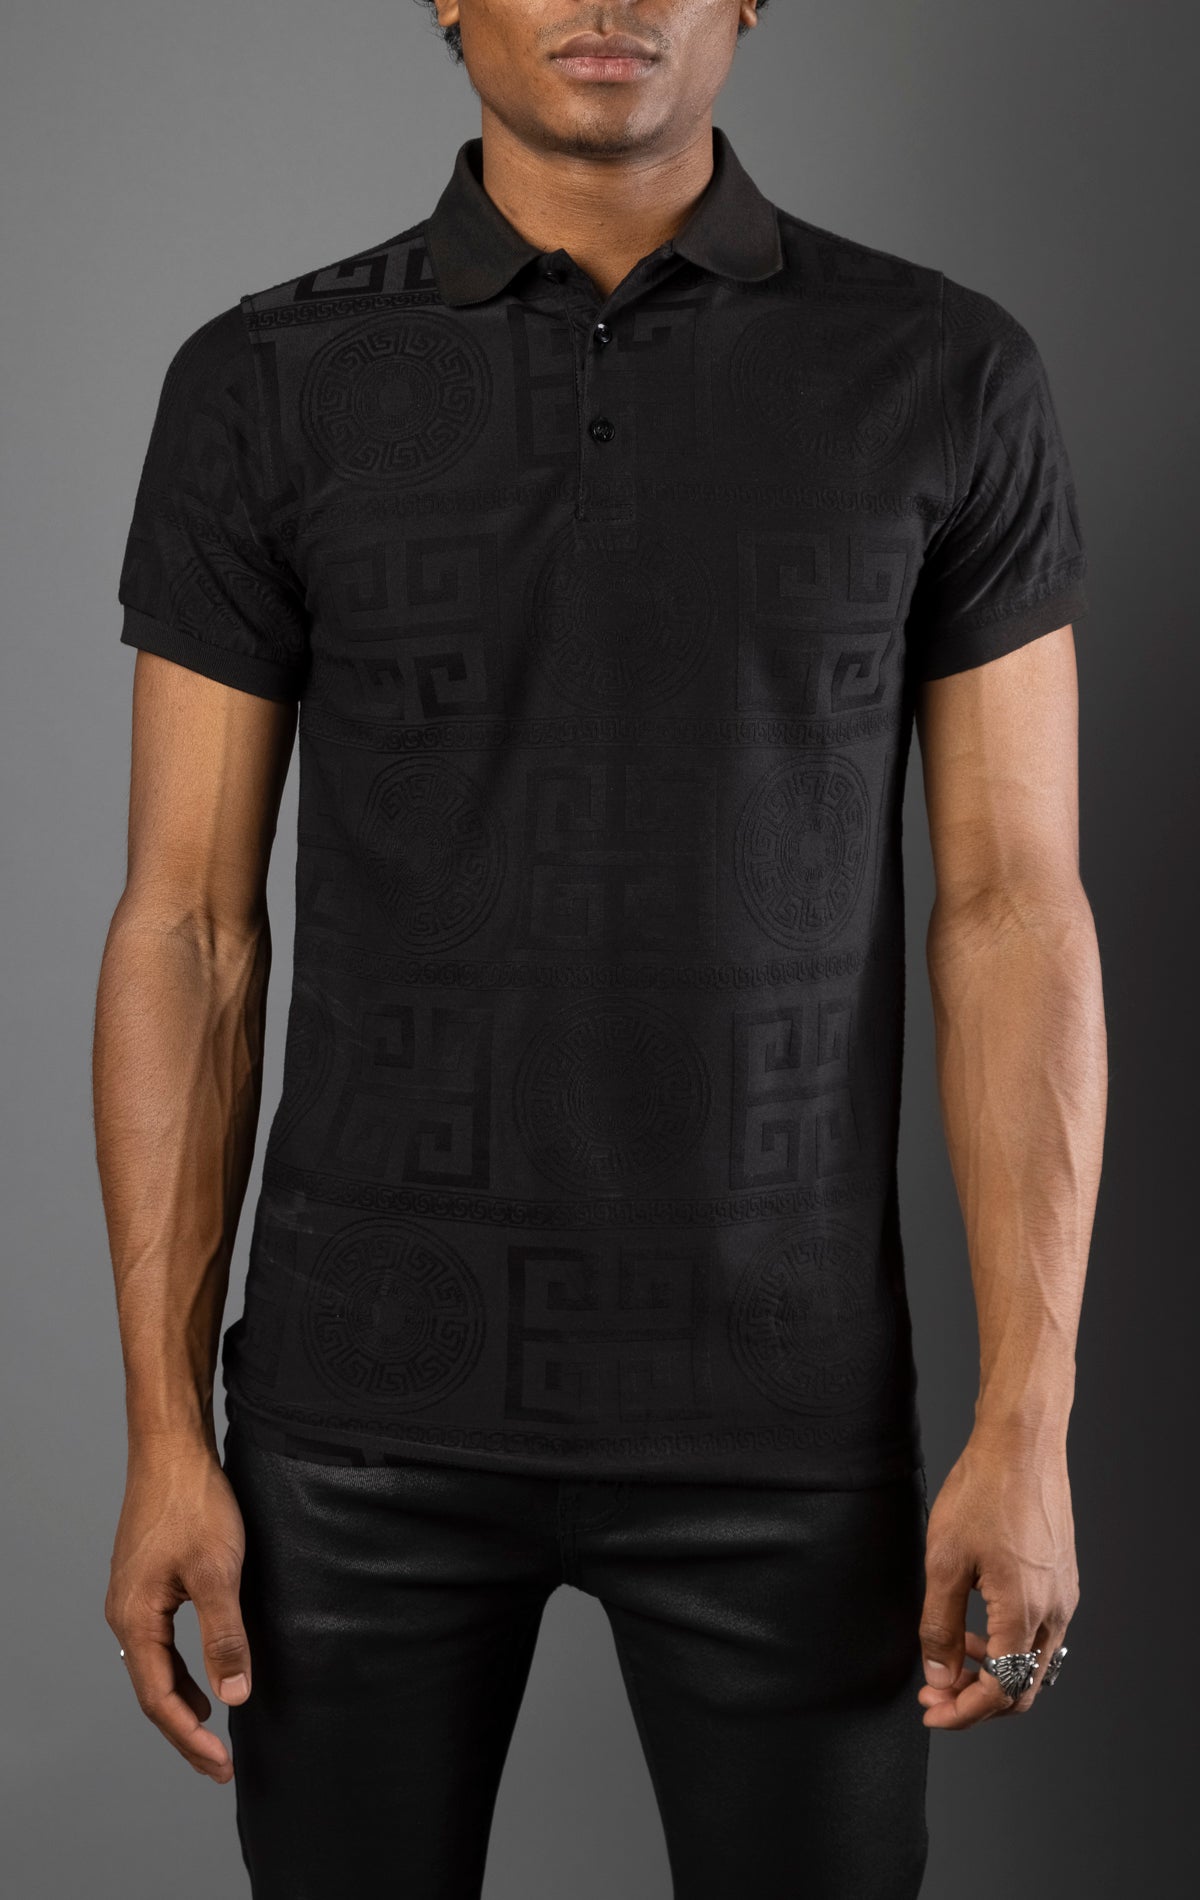 Black Men's regular-fit, short-sleeve polo shirt. The shirt features a seamless Greek pattern and a classic polo design